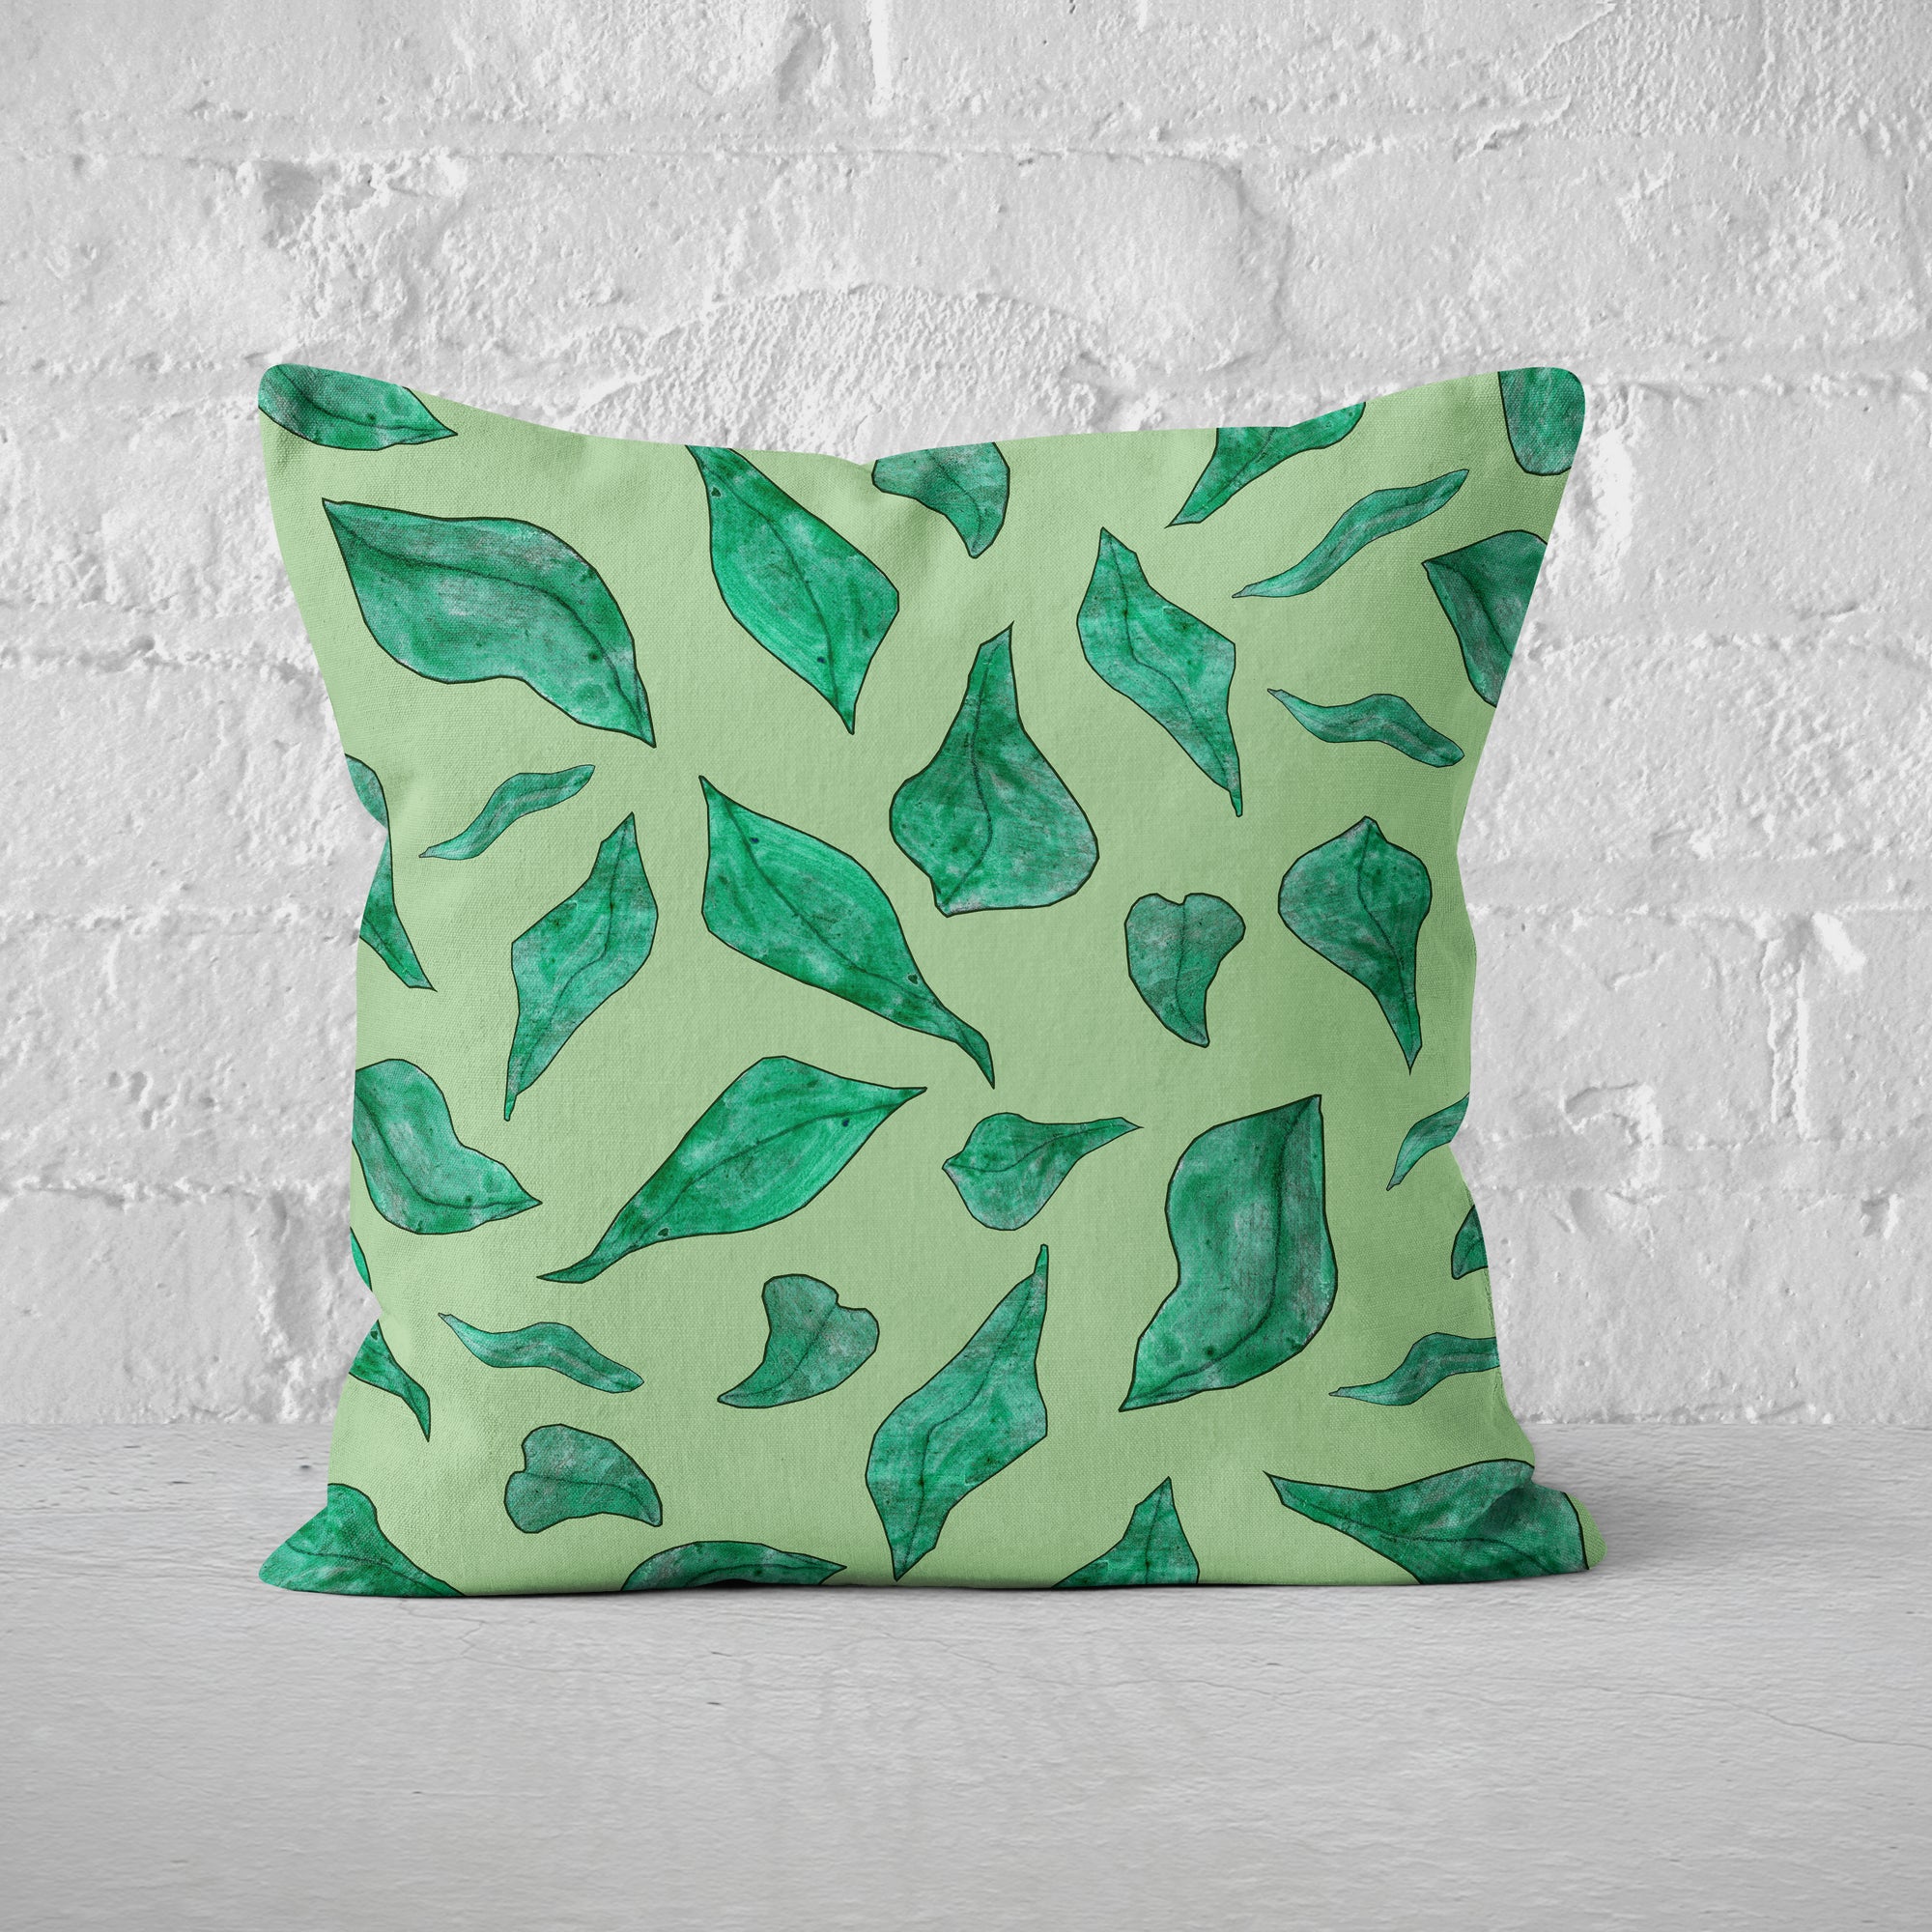 Pillow Cover Feature Art 'Fall' - Green - Cotton Twill